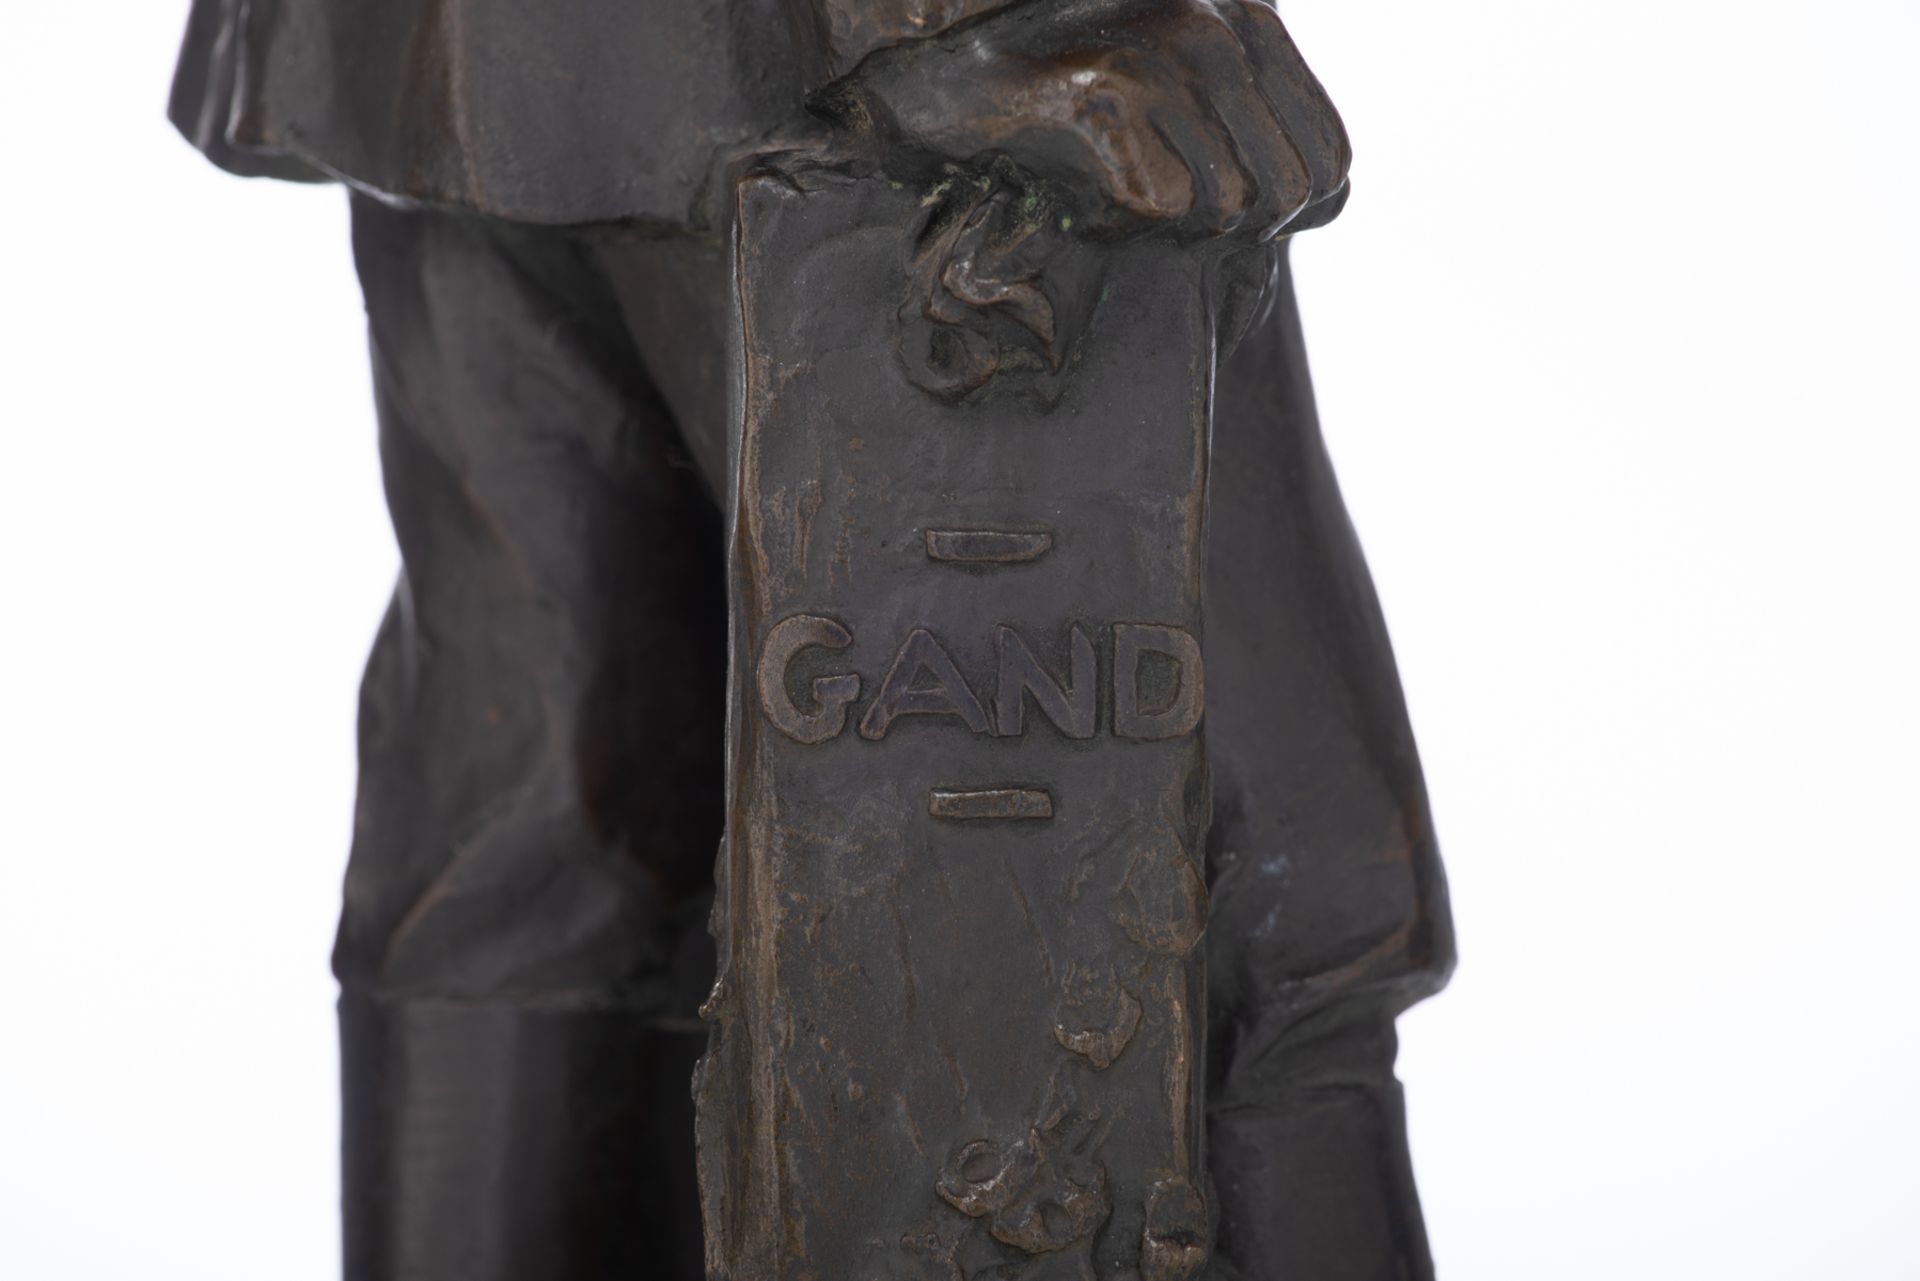 Herain J., the portrait of a standing marshal, with inscription 'Gand', and dated 1892, with a casti - Bild 6 aus 8